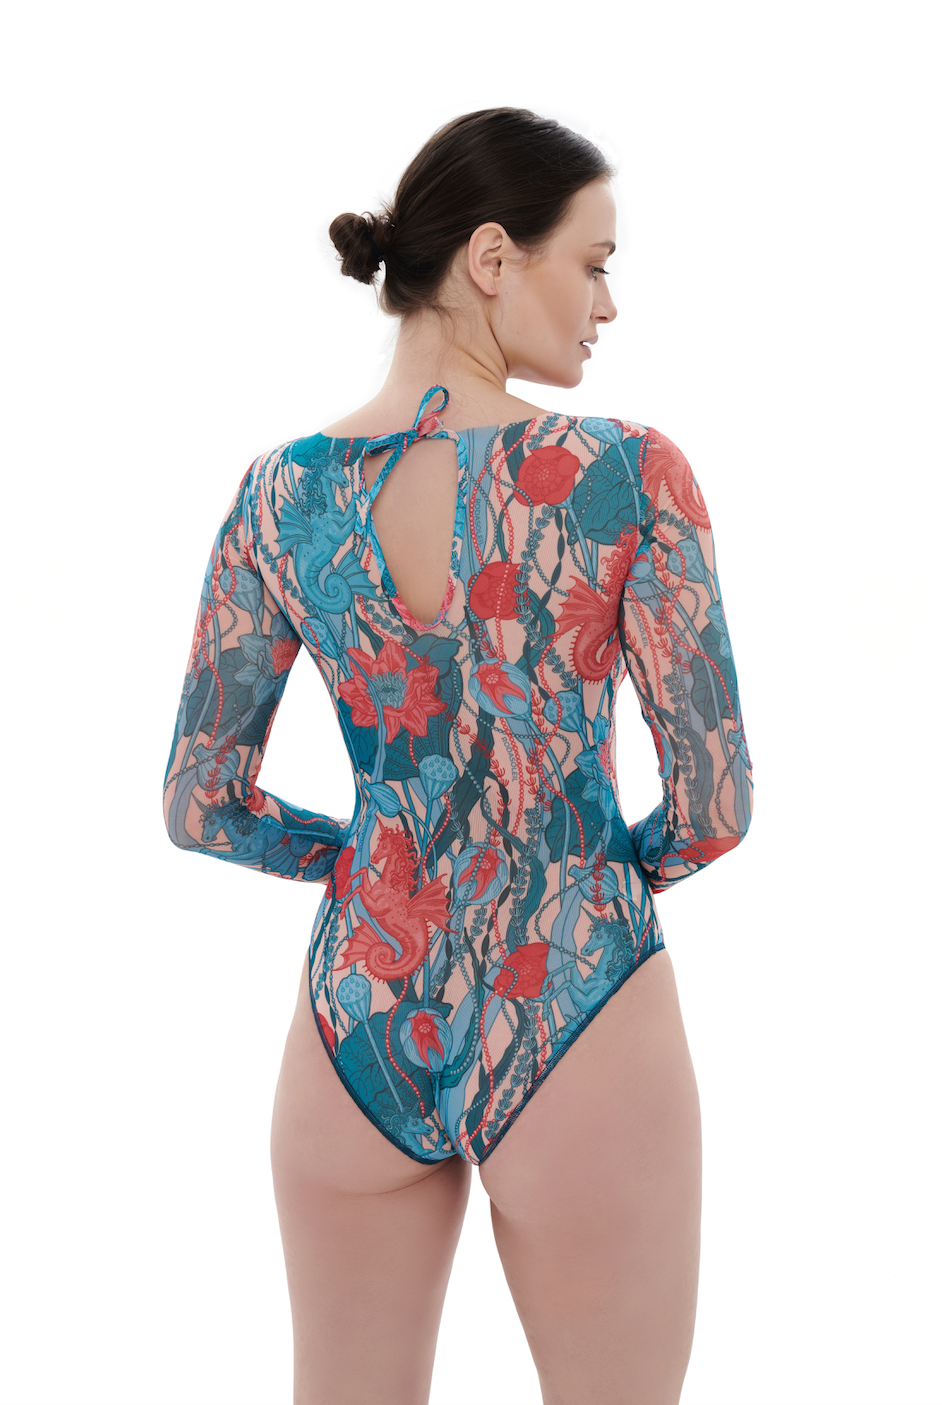 This file showcases sustainable tan-through smart swimsuits adorned with the enchanting Seaunicorns print. Featuring a one-piece swimsuit design with sleeves, it exudes summer luxury and sophistication